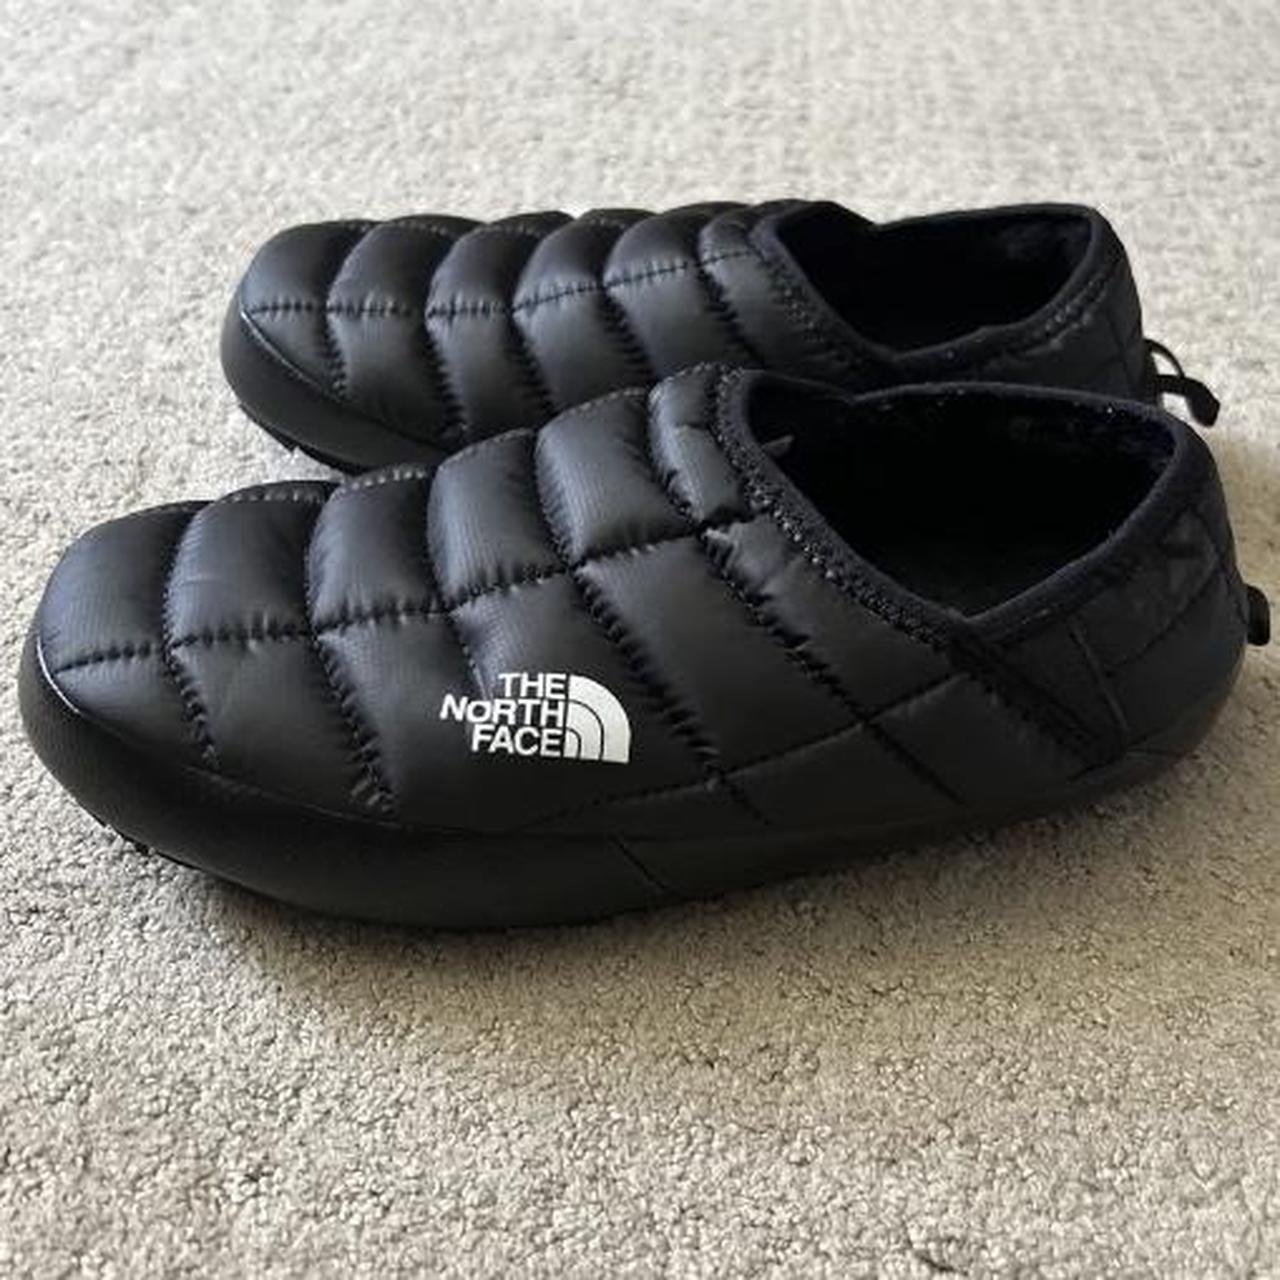 The North Face Women's Slippers (4)